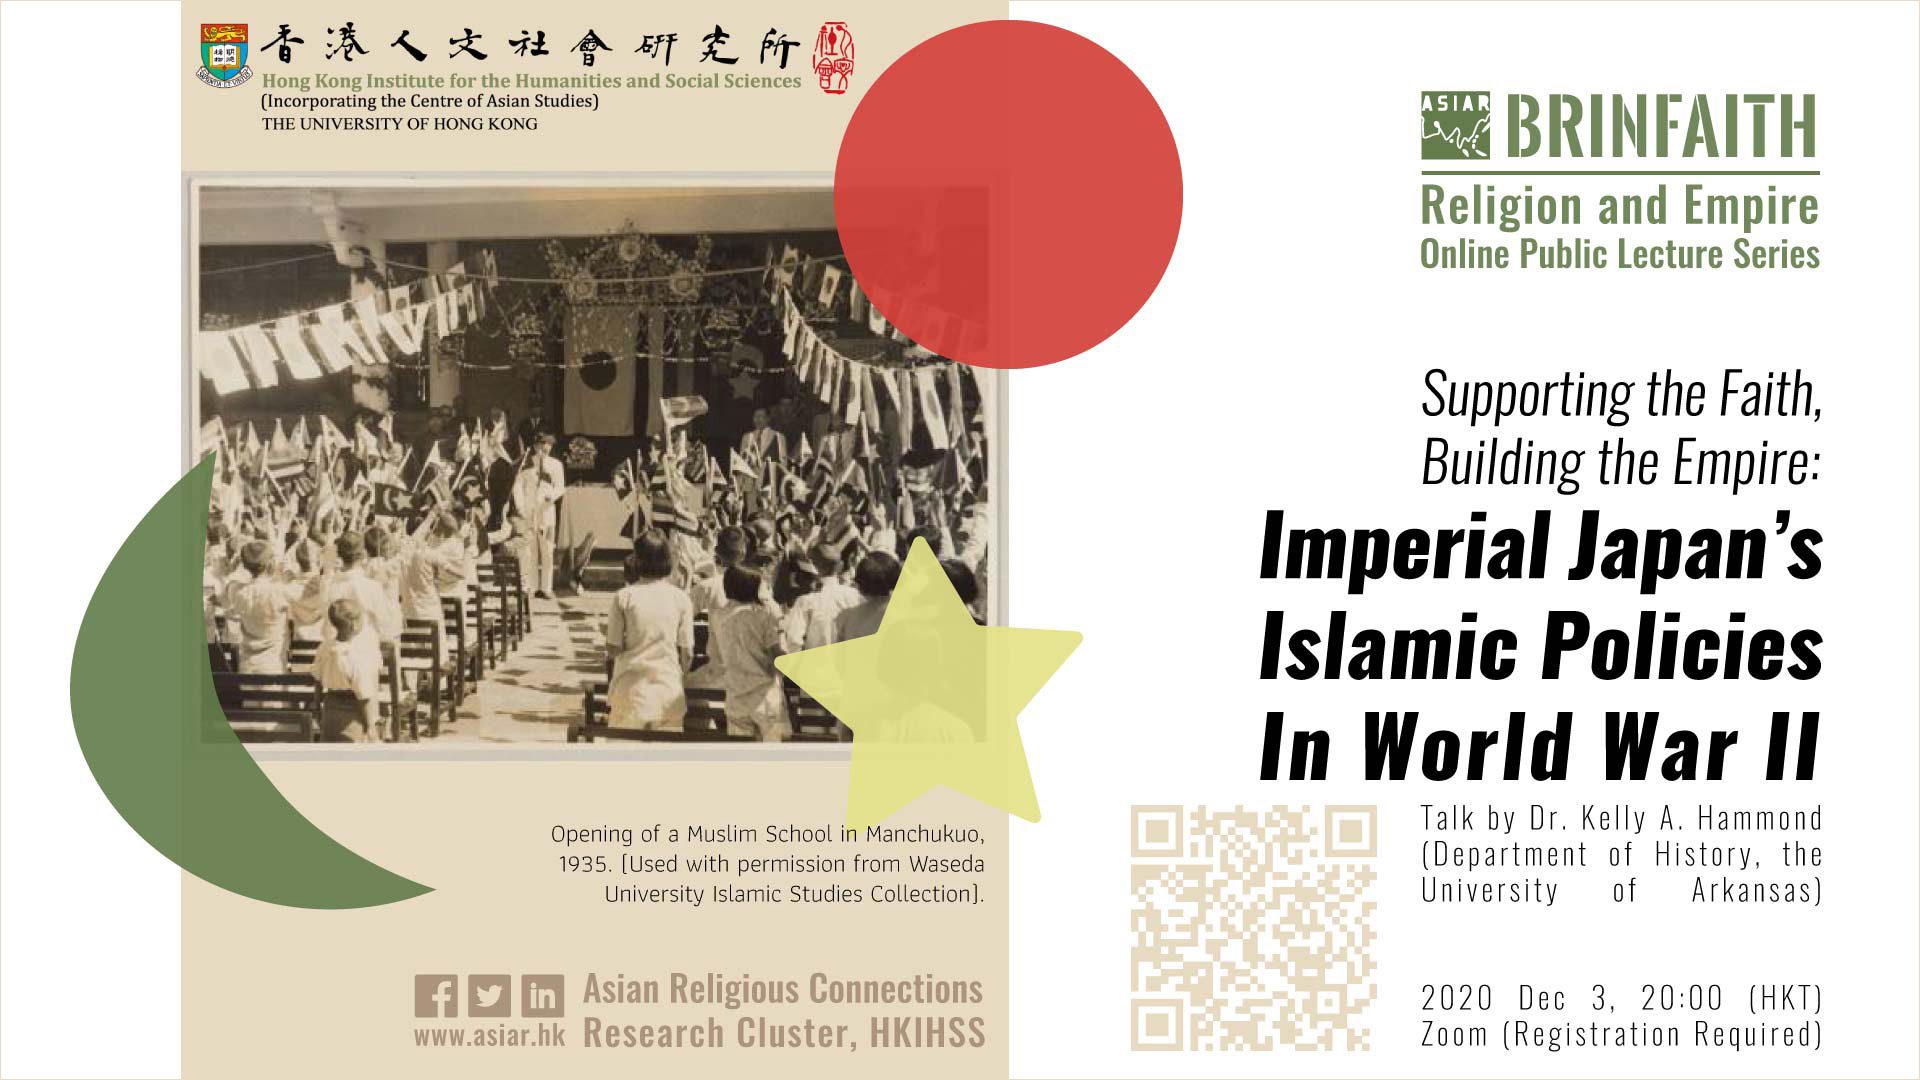 BRINFAITH Religion and Empire Lecture Series on “Supporting the Faith, Building the Empire: Imperial Japan’s Islamic Policies in World War II” by Dr. Kelly Hammond (December 3, 2020)